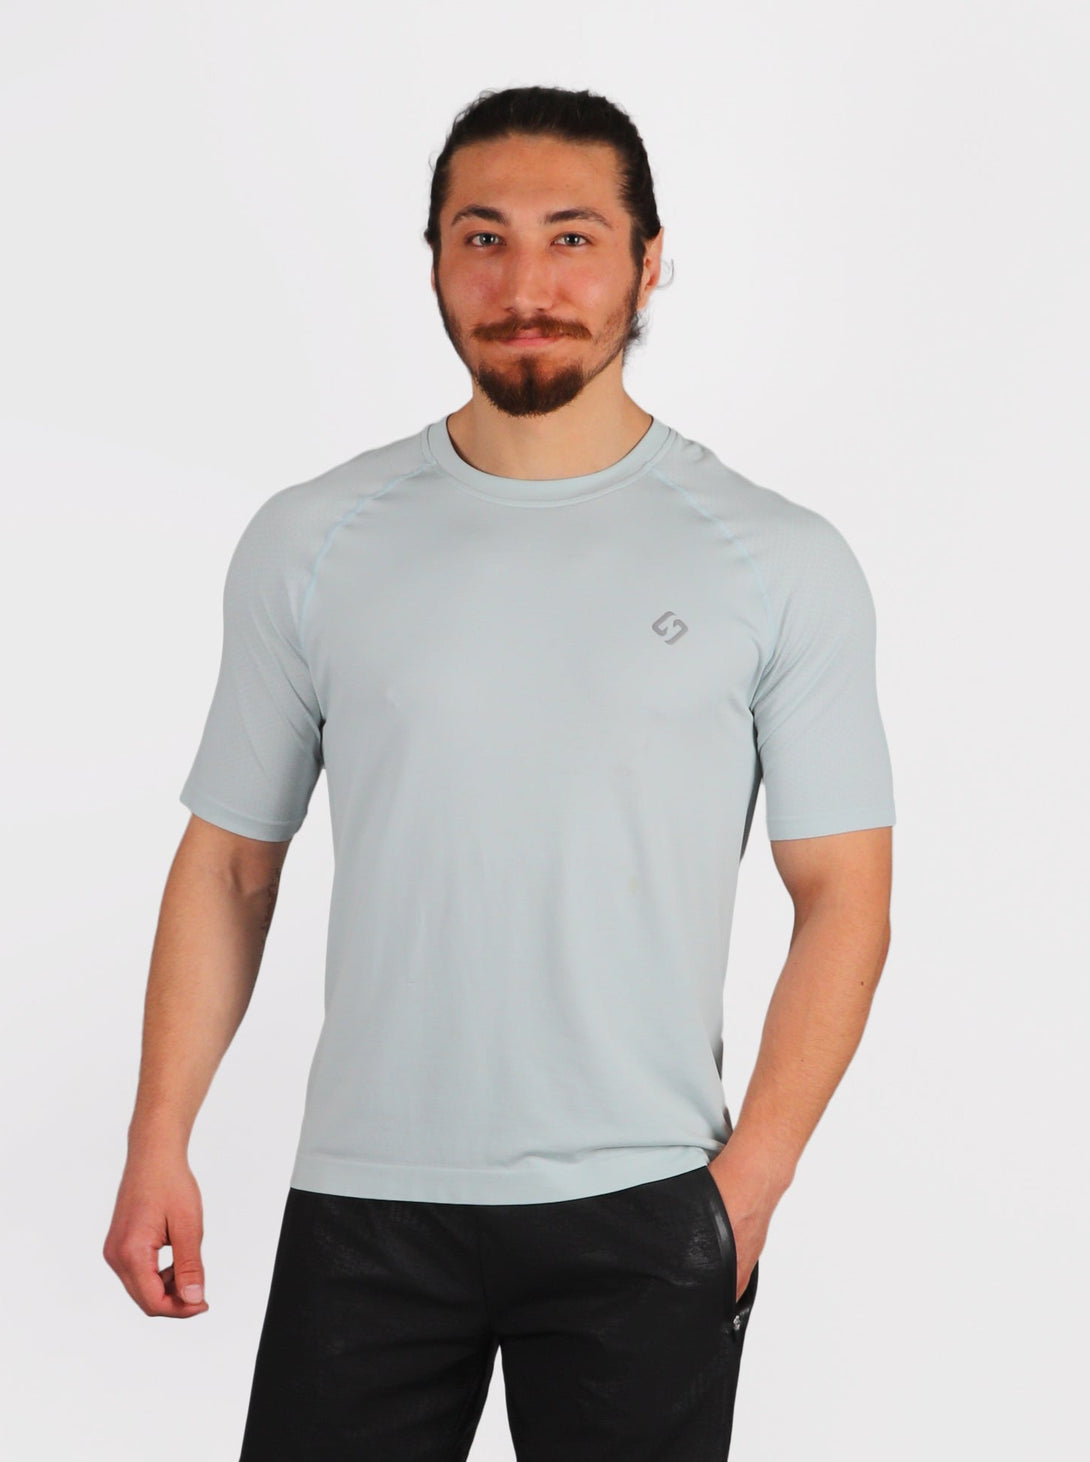 A Man Wearing Baby Blue Color Seamless Workout Comfort T-Shirt